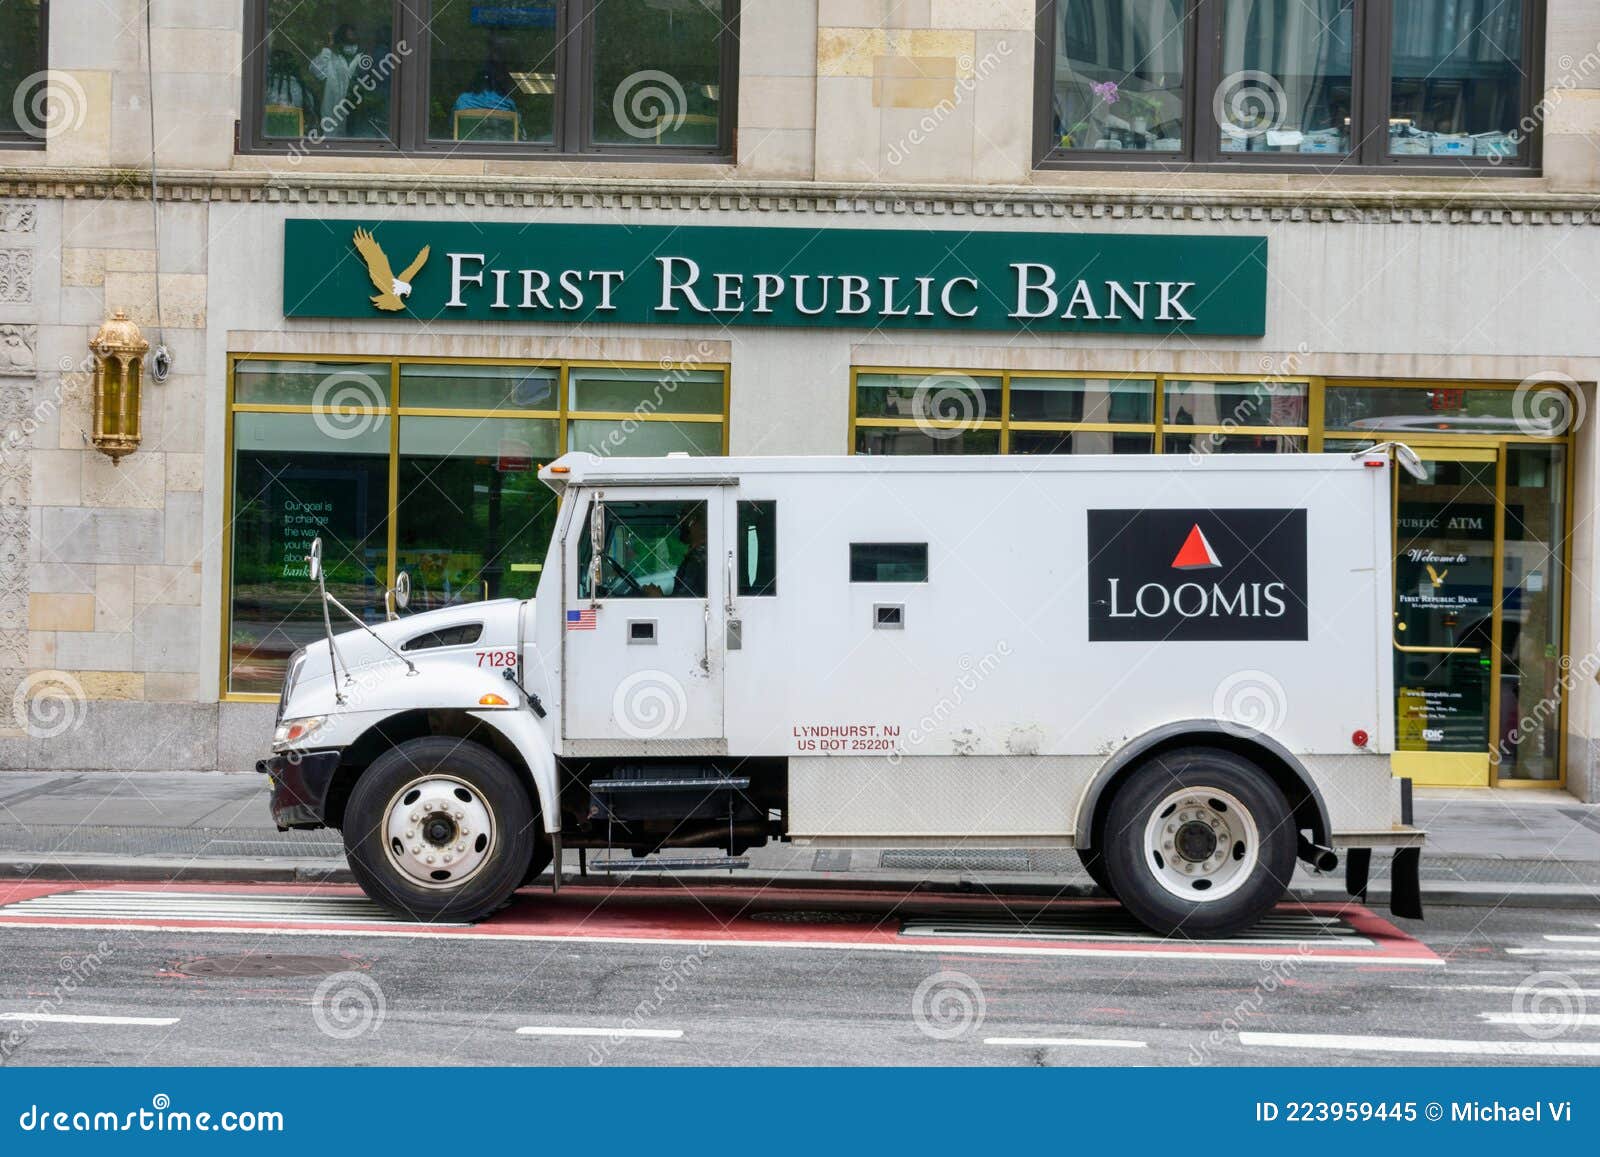 Loomis Armed Security Vehicle Parked at First Republic Bank. - Manhattan,  New York, USA - 2021 Editorial Image - Image of united, bank: 223959445